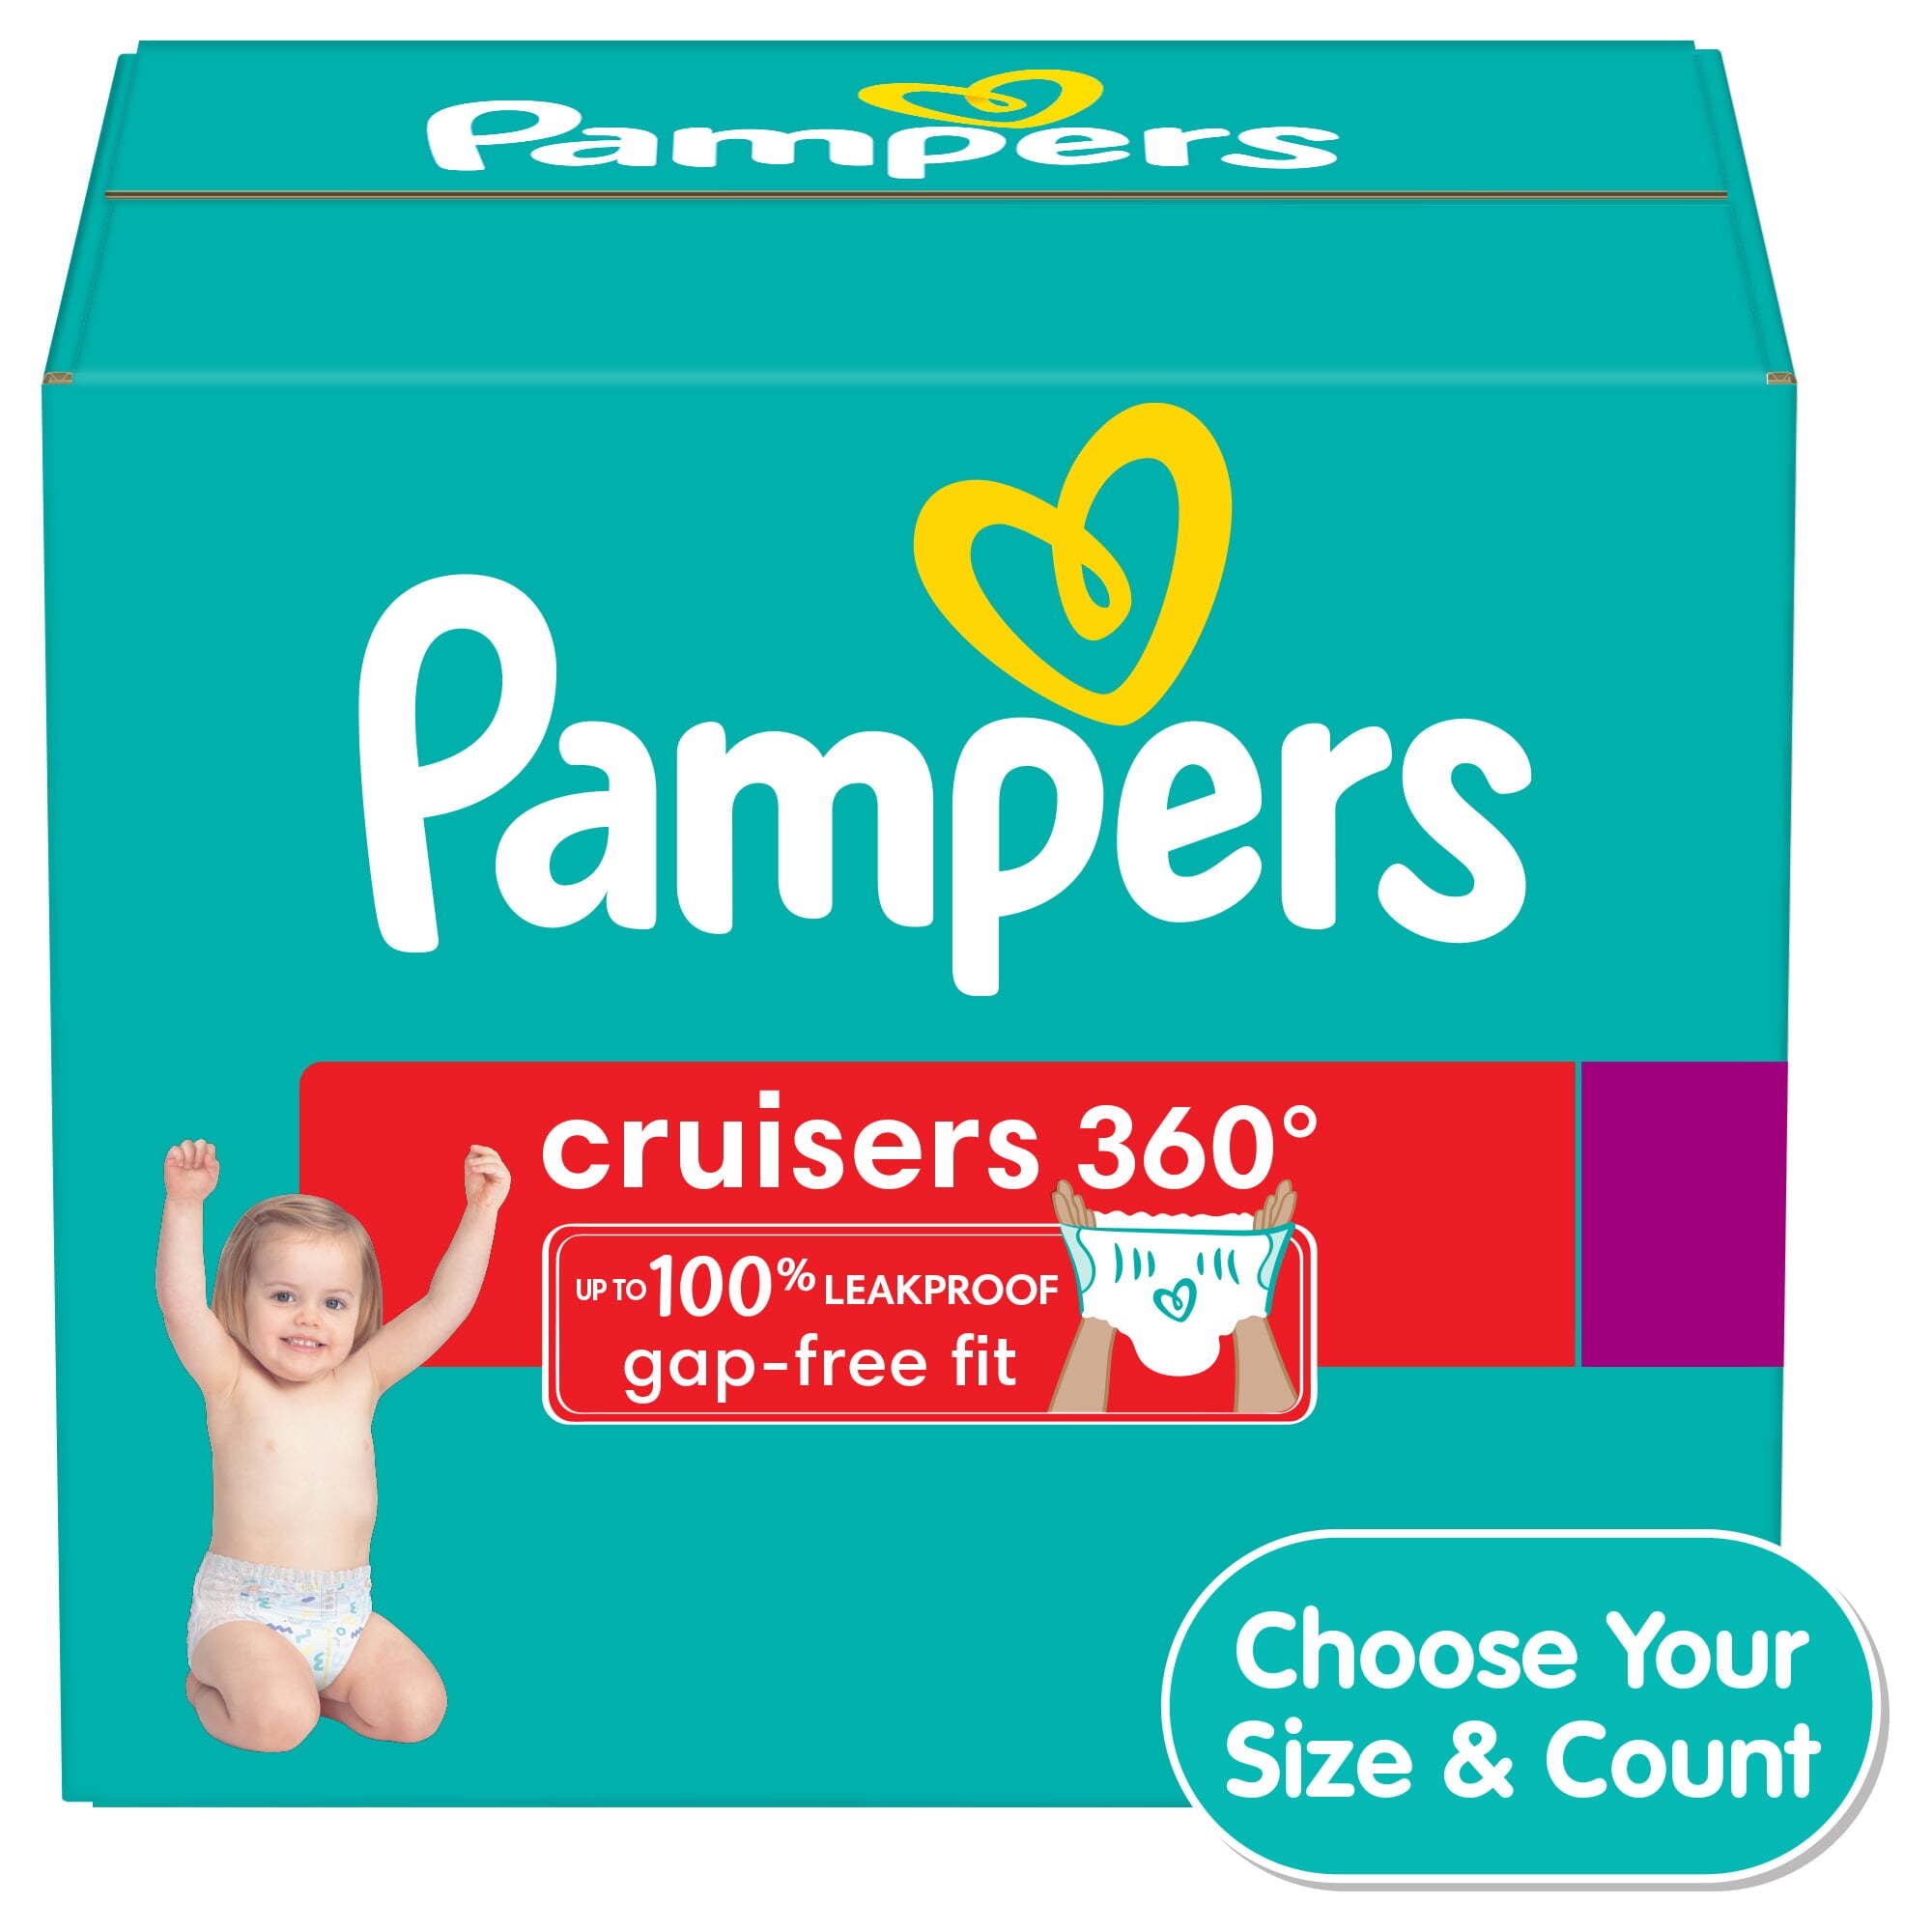 Pampers Cruisers 360 Fit Diapers (Choose Your Size & Count)